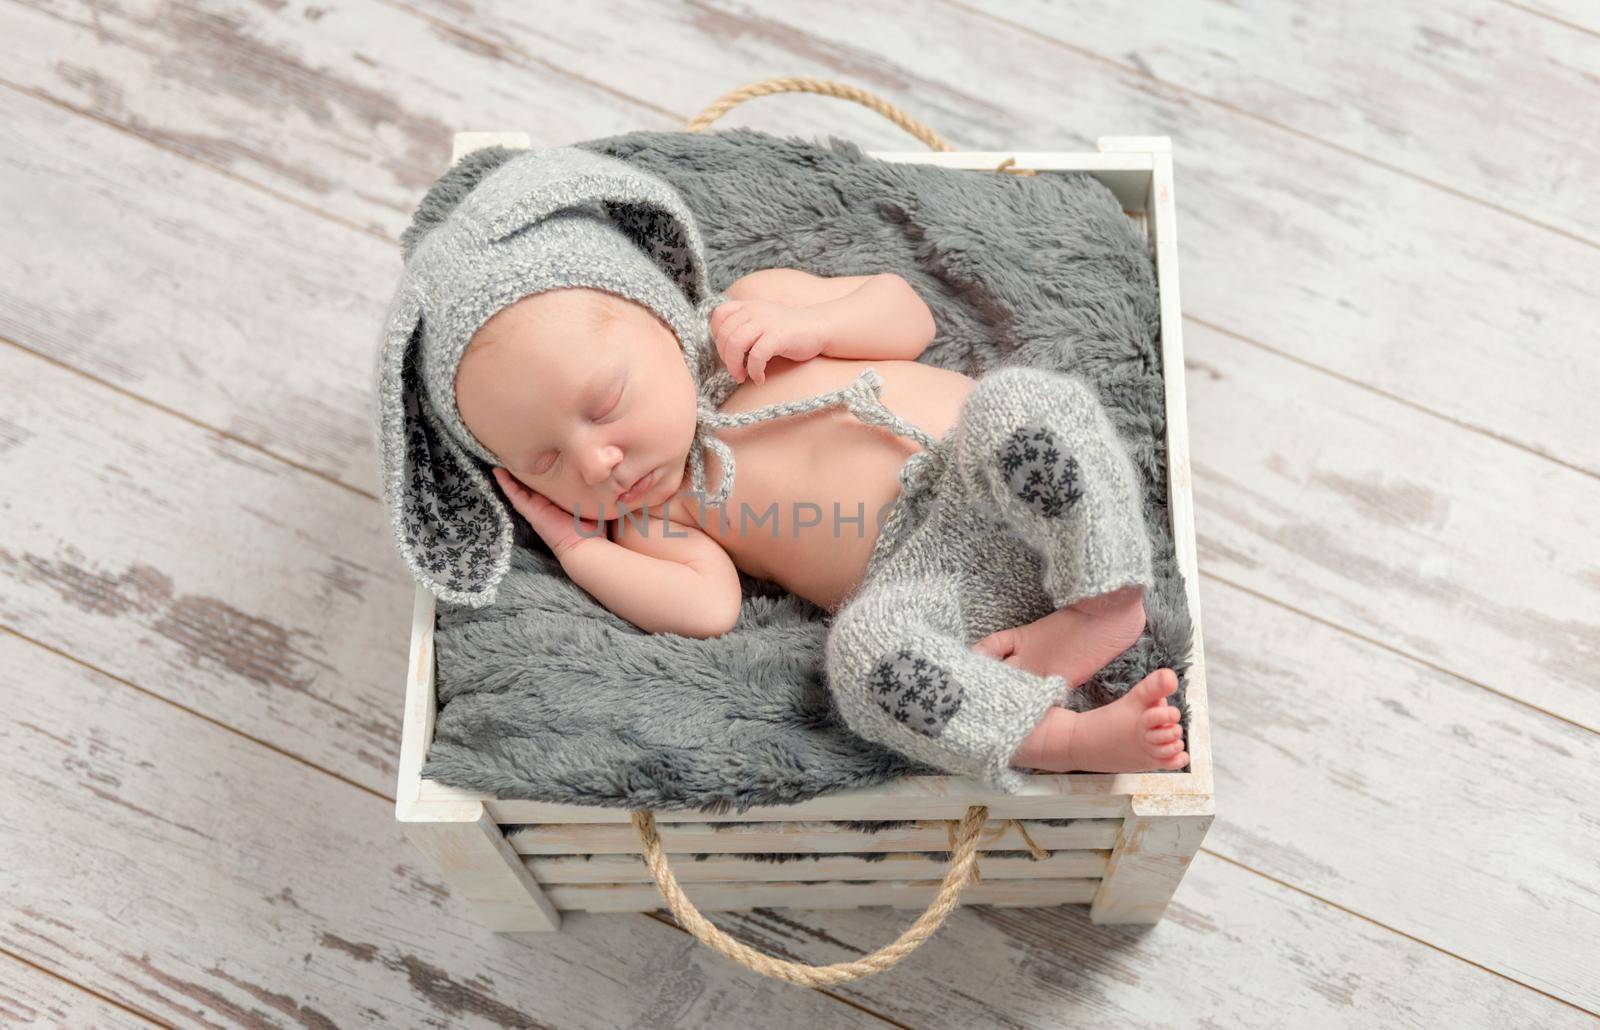 sweet sleeping baby in gray panties and hat with hare ears with toy on basket, top view